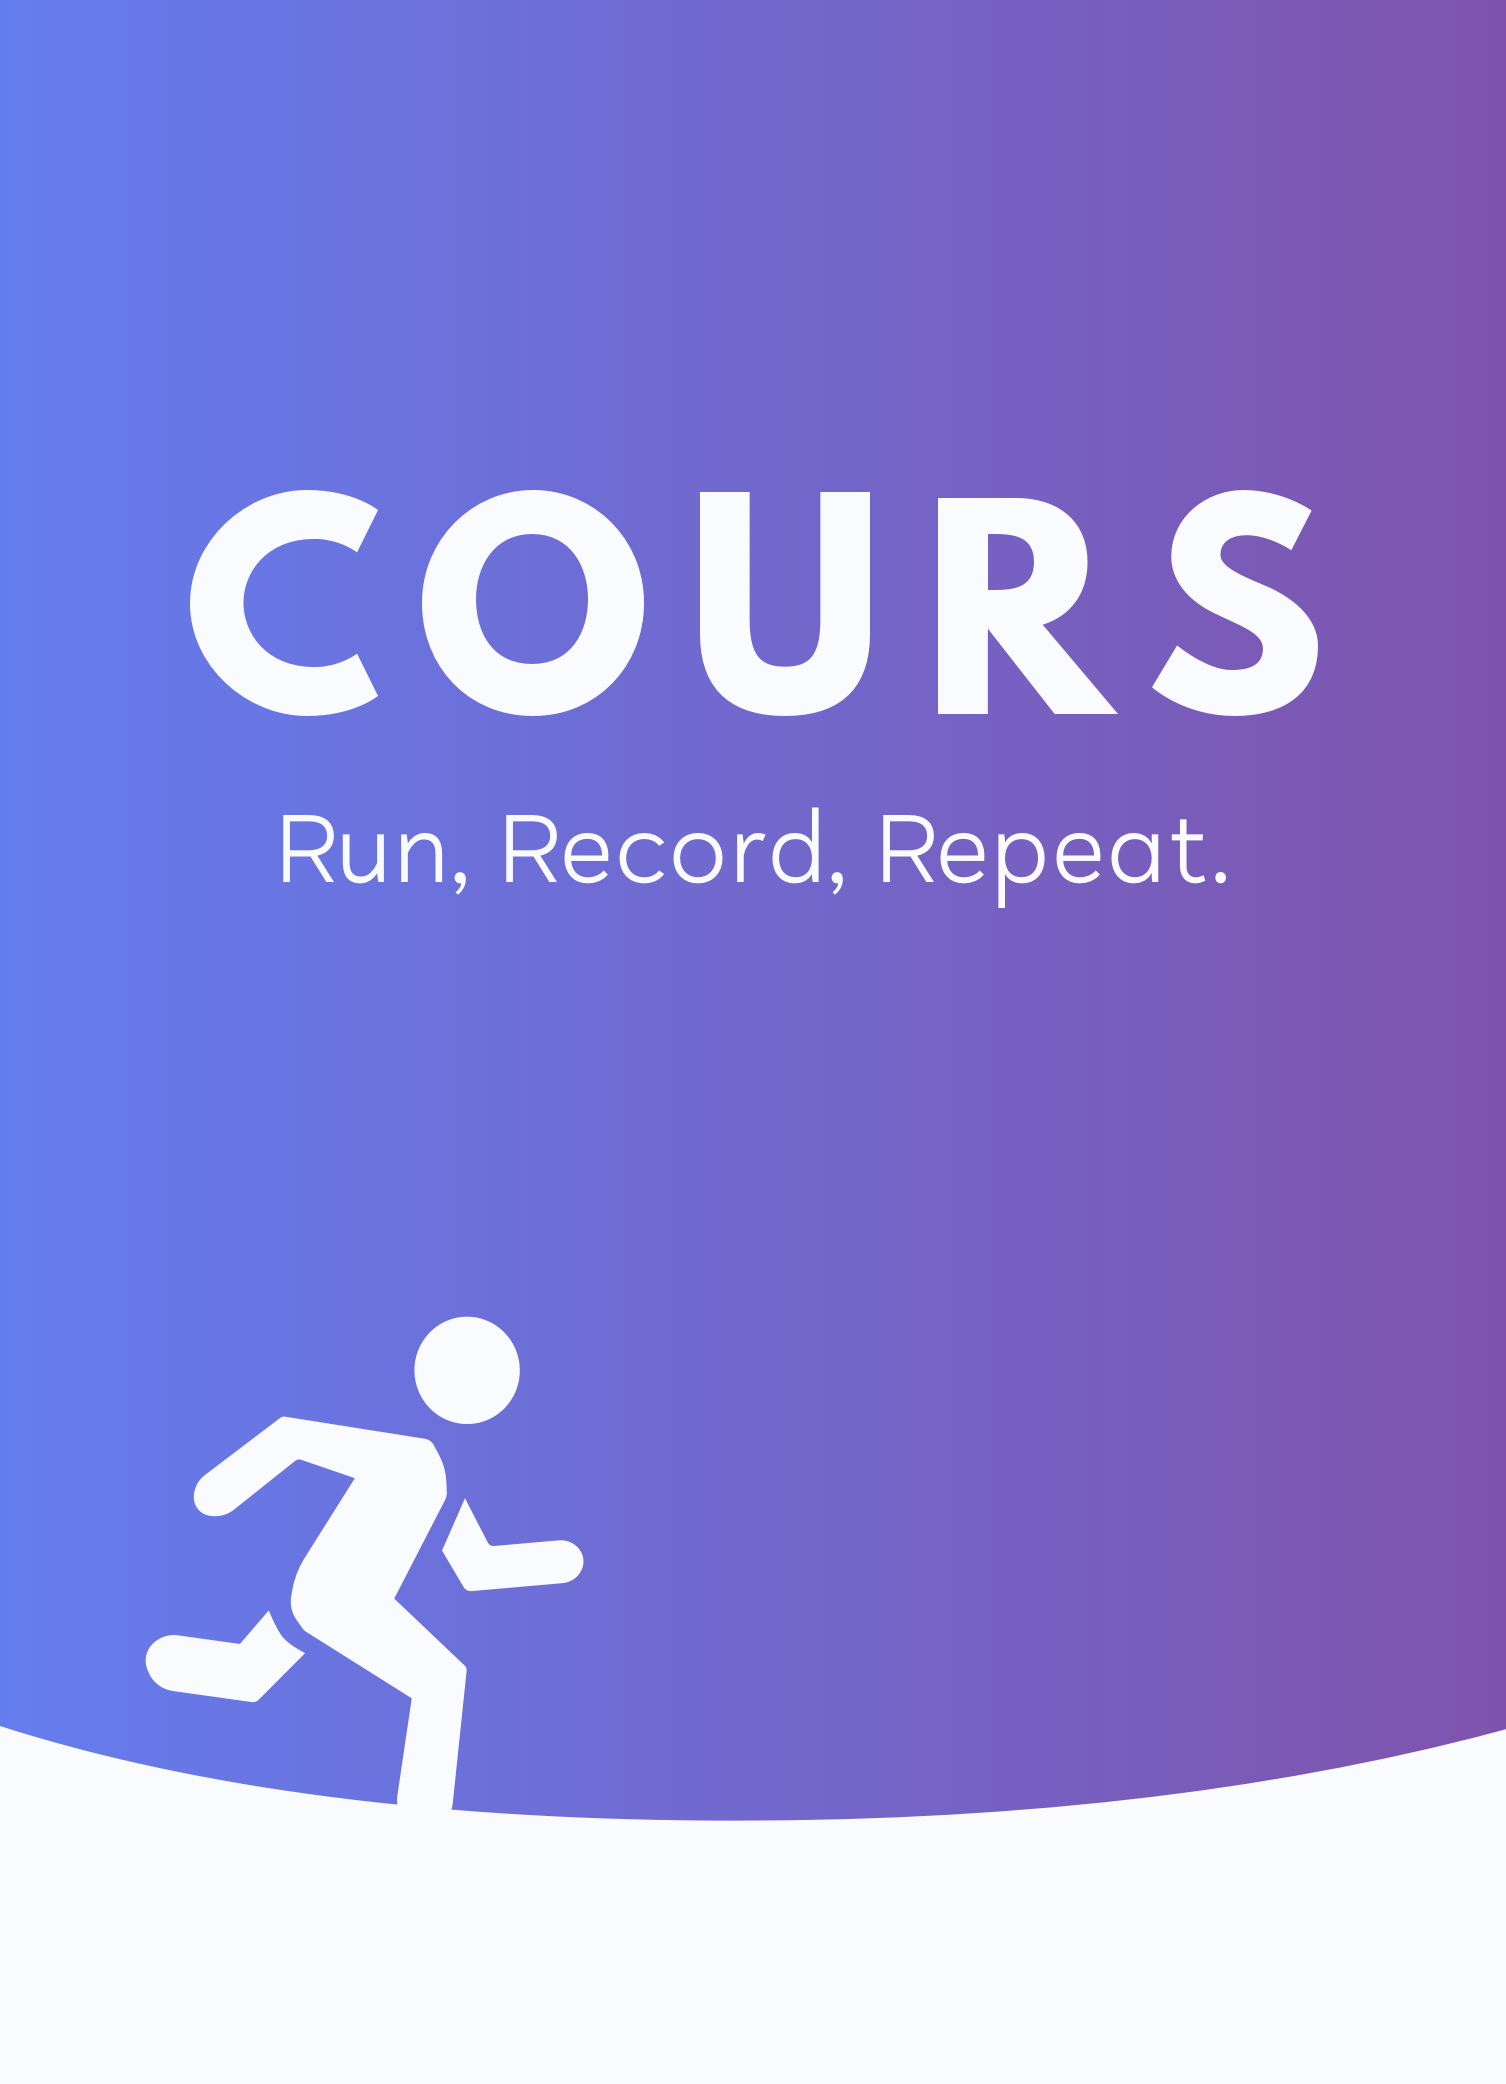 The logo and branding for the Cours App